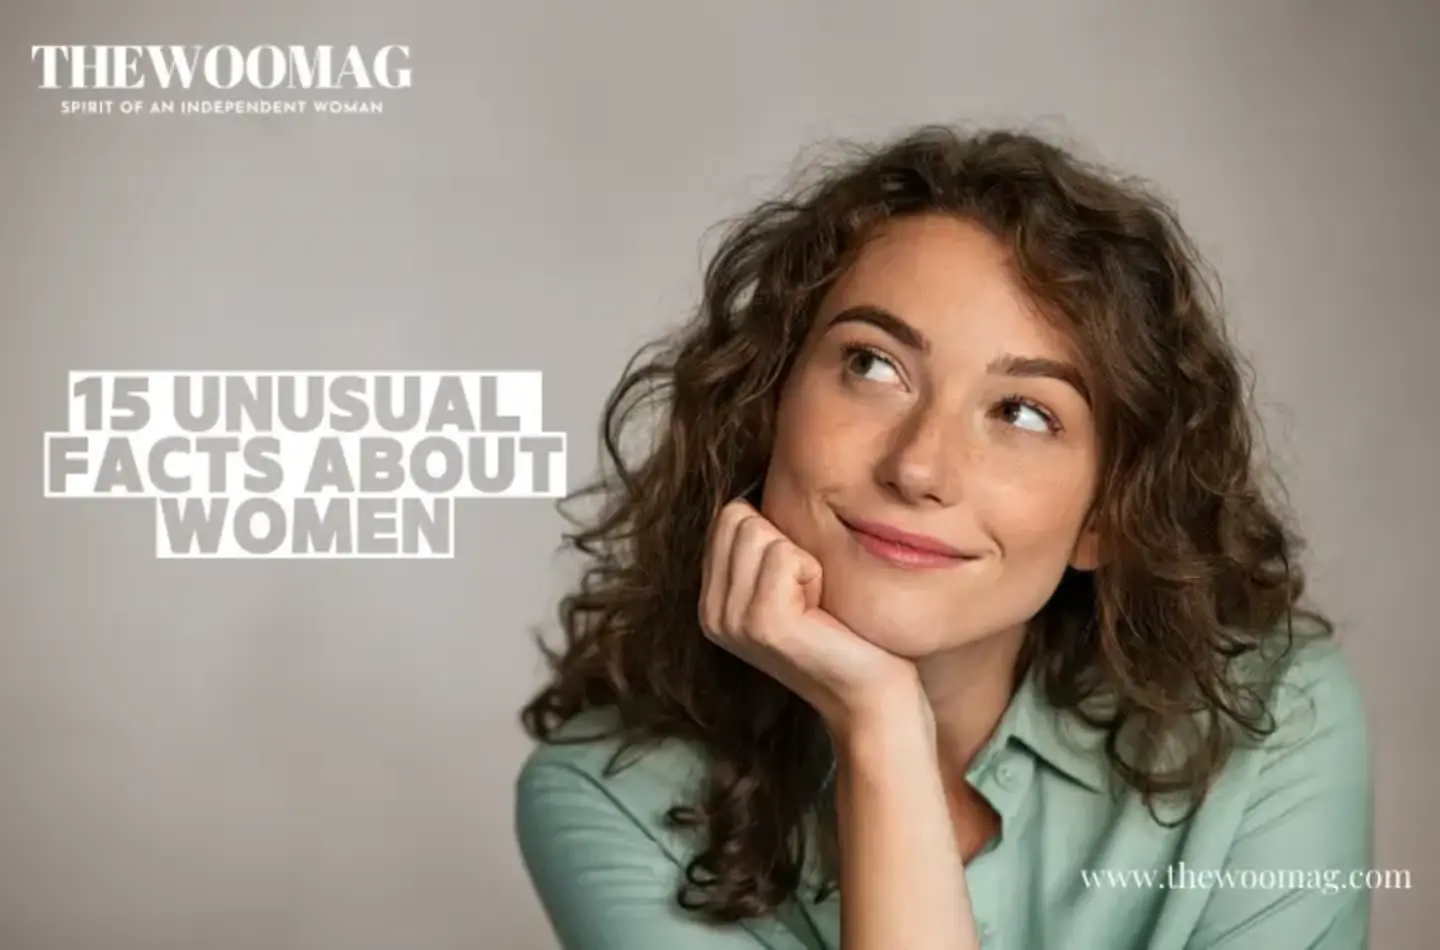 15 Unusual & Surprising Facts About Women